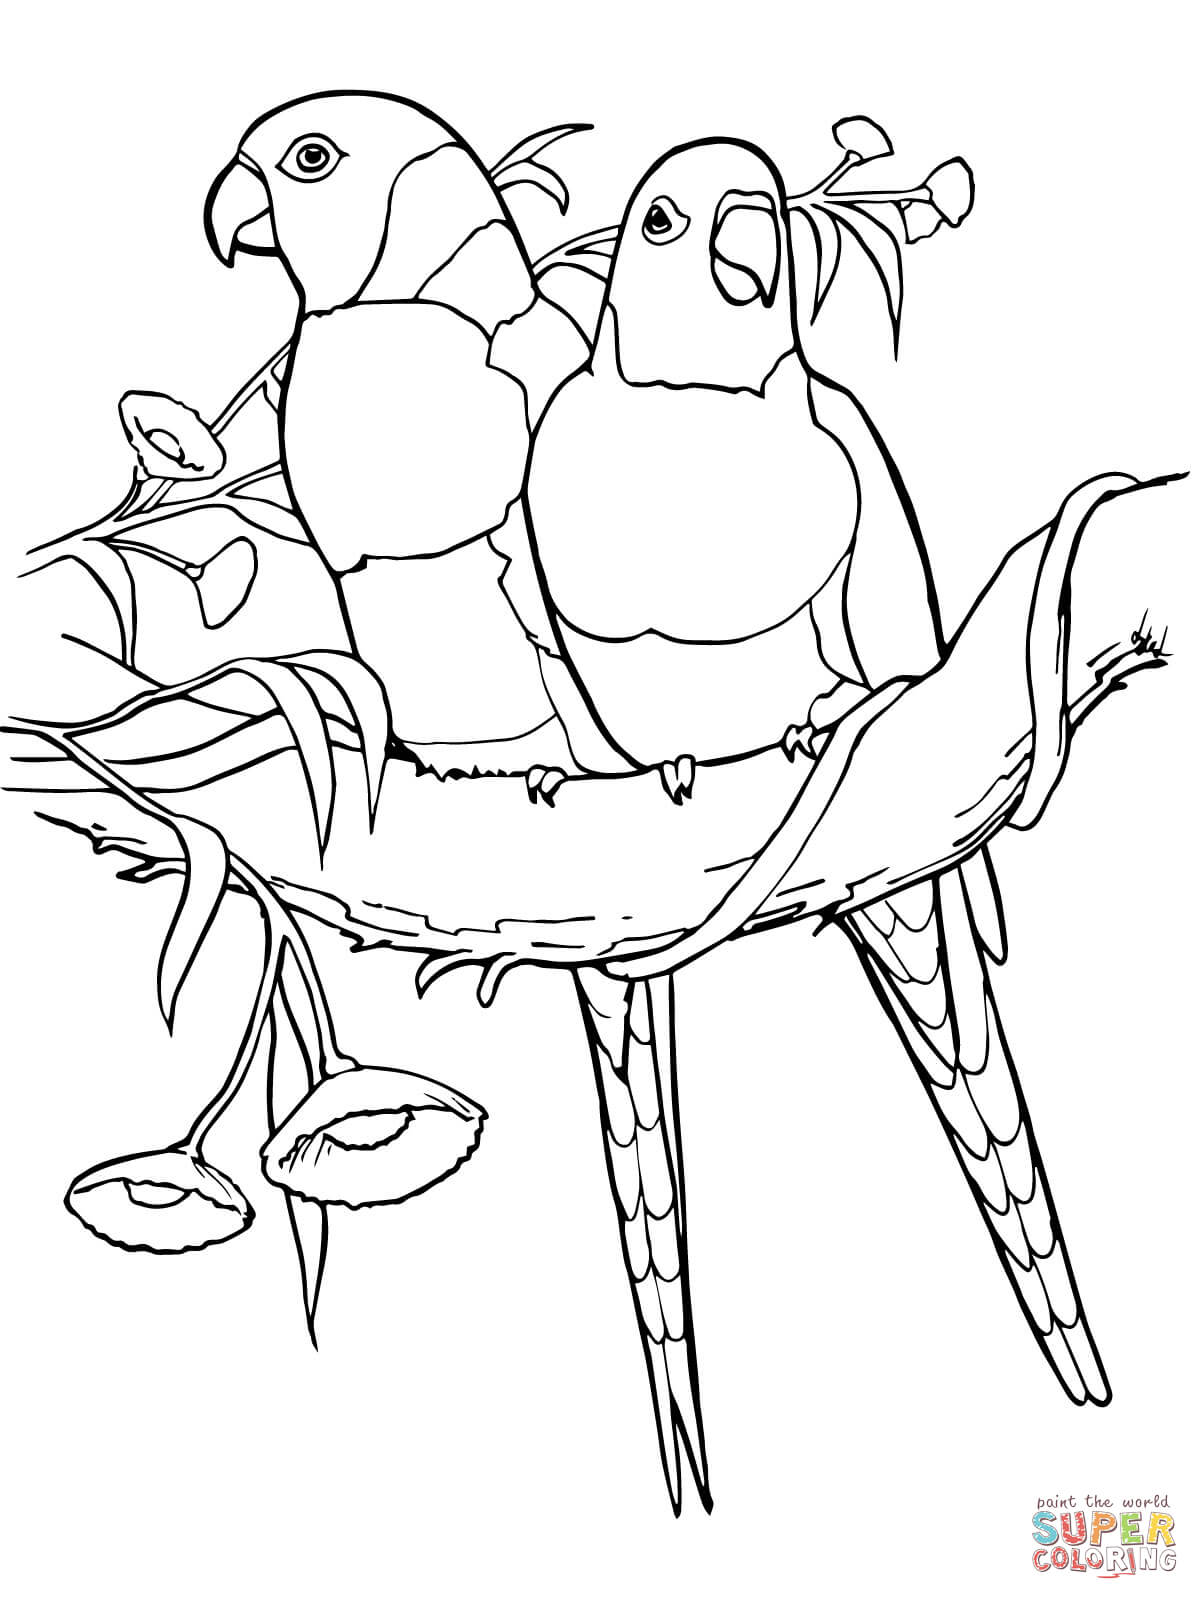 Red collared lorikeets coloring page free printable coloring pages